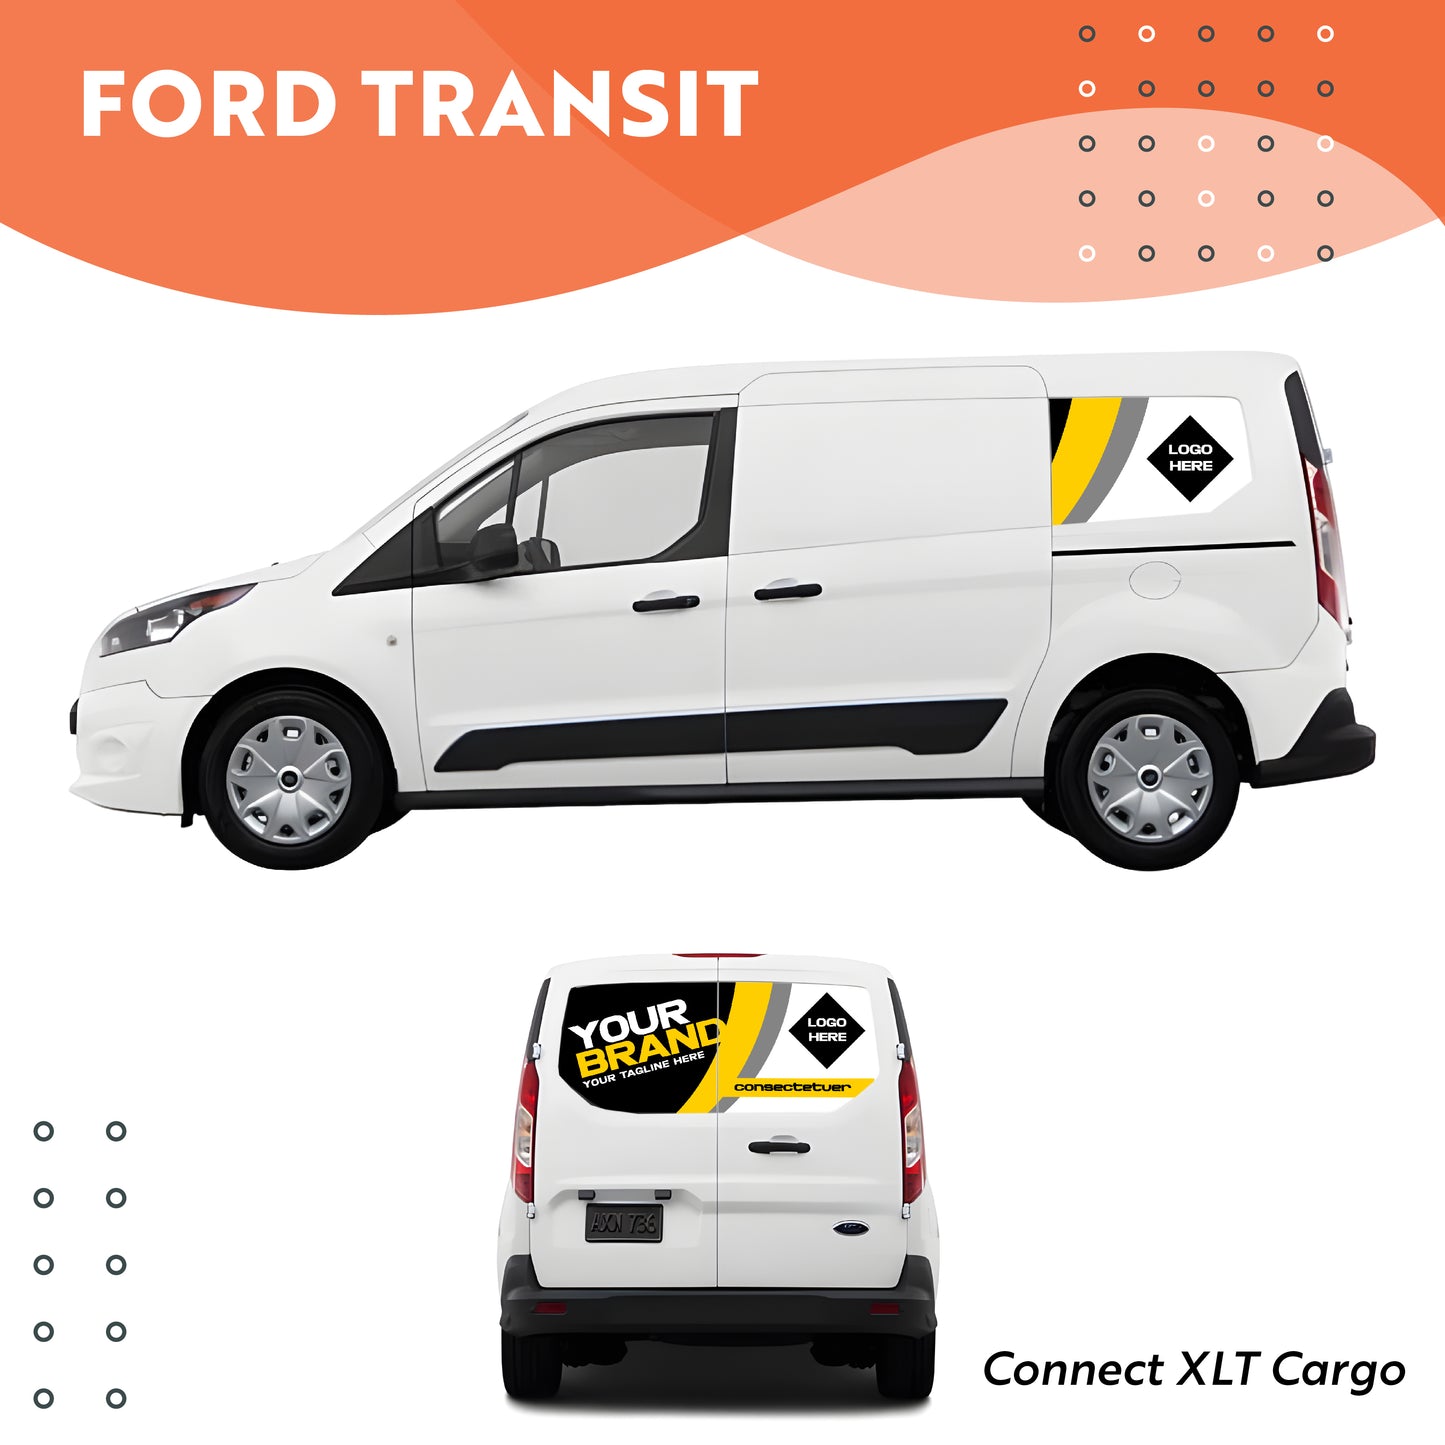 FORD TRANSIT Connect XLT Cargo Wrap